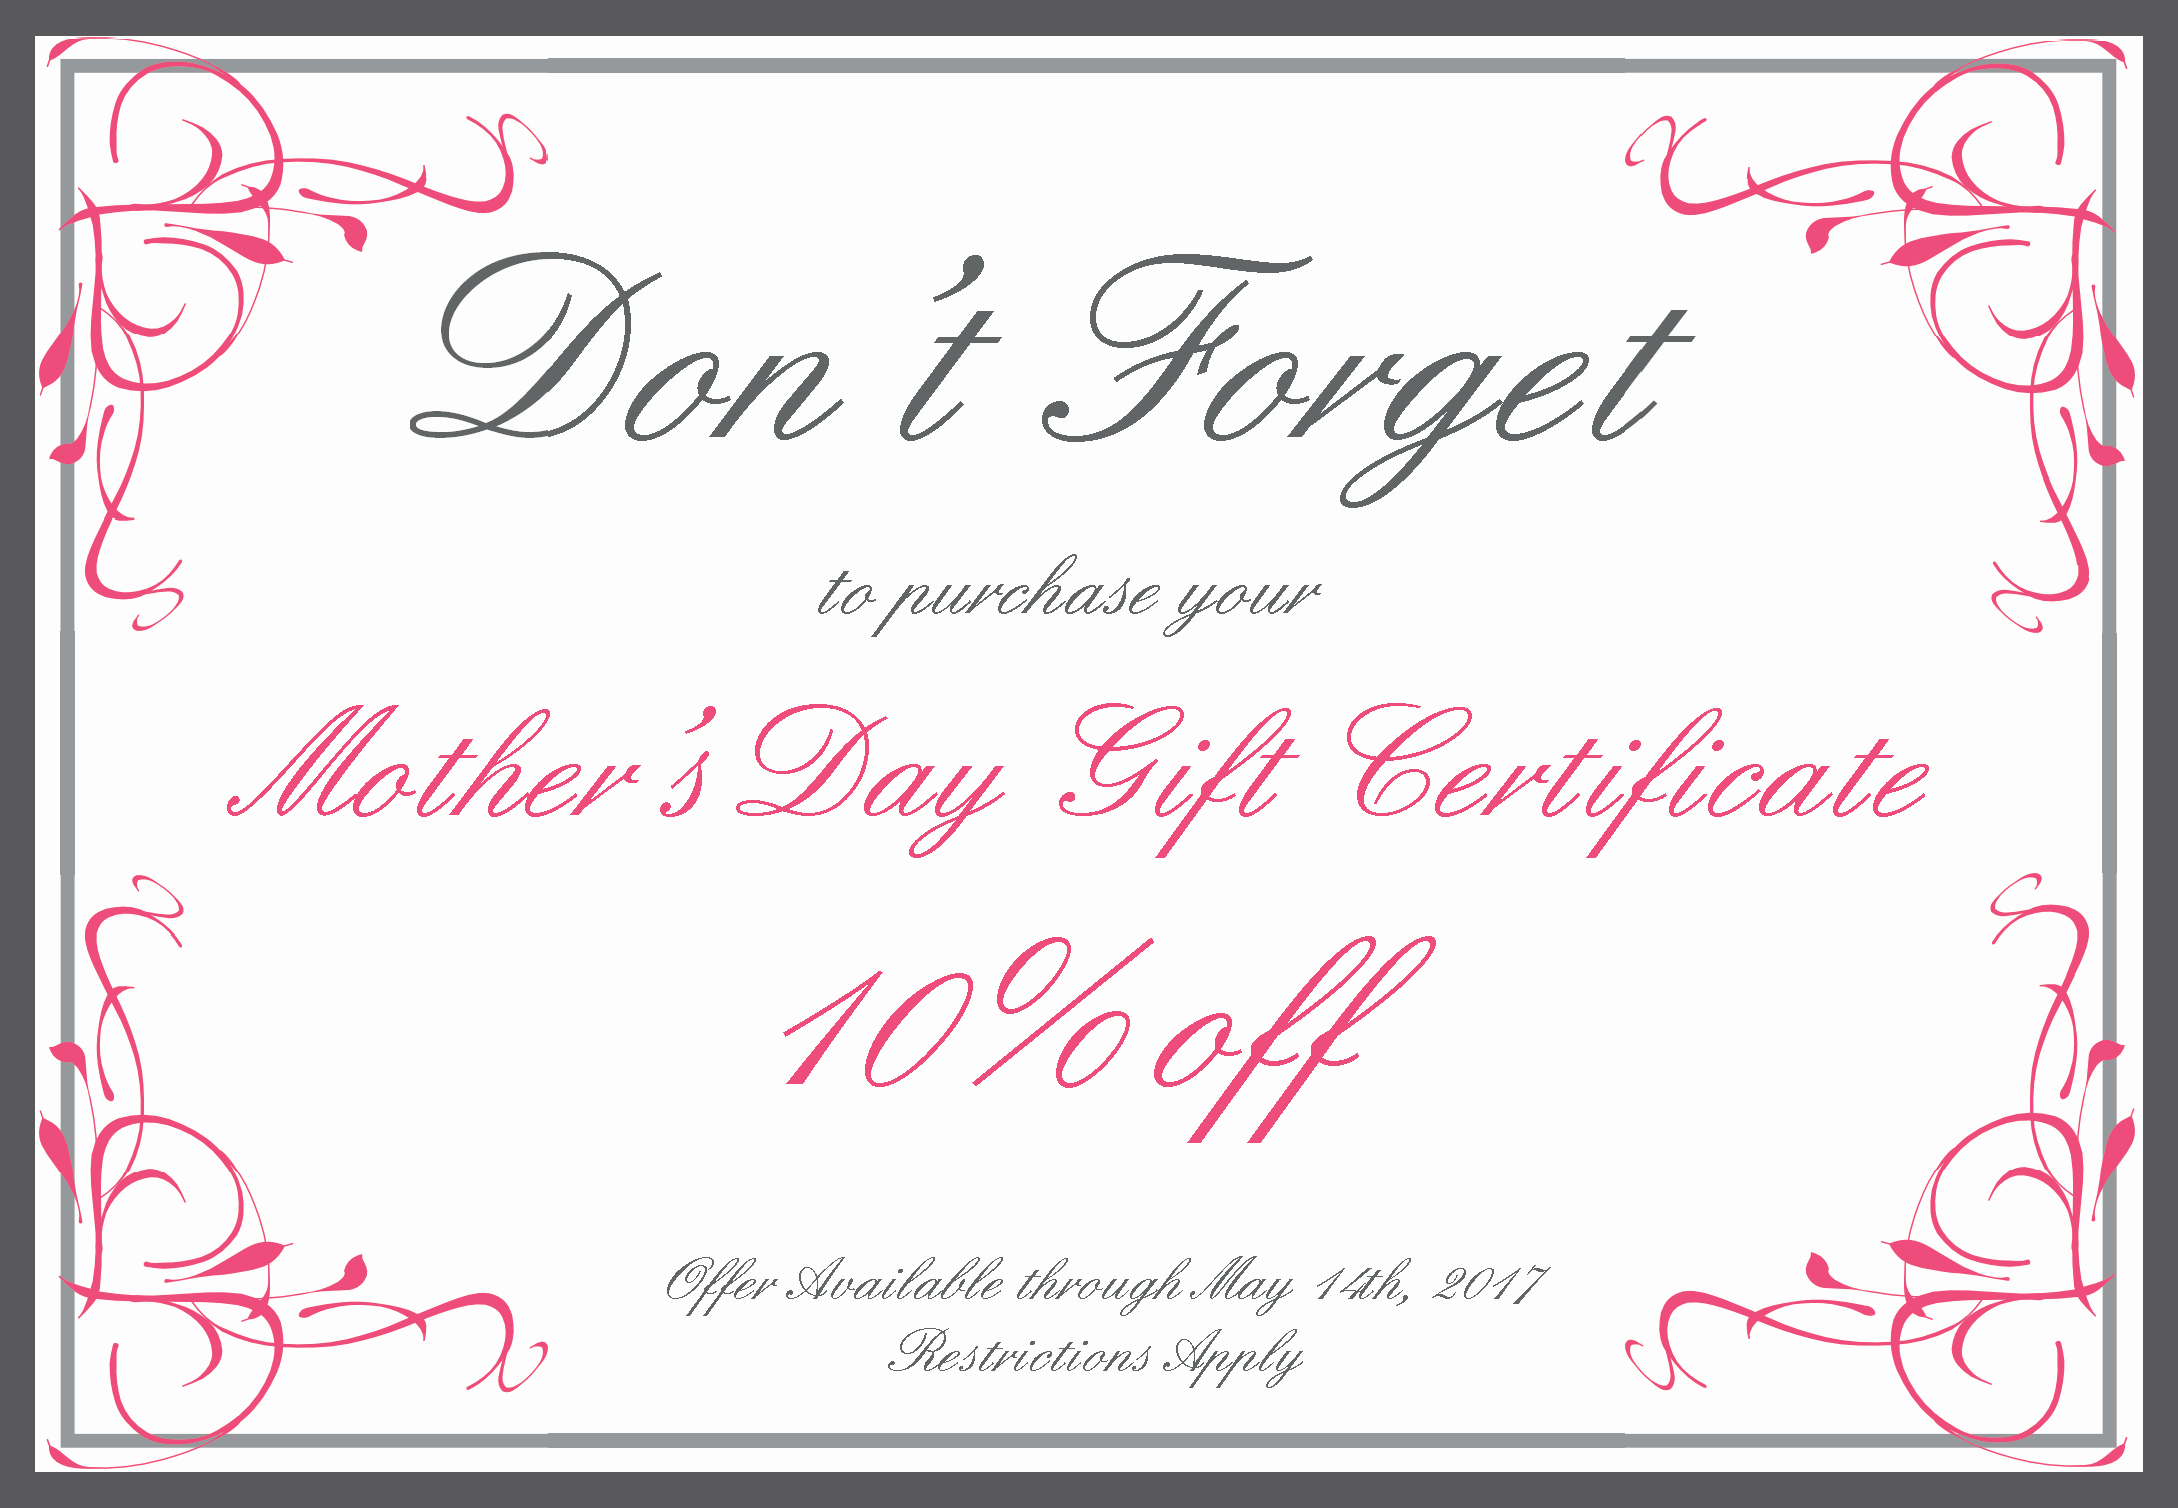 Mothers Day Certificate Template Best Of News and Specials Brian Biesman Md